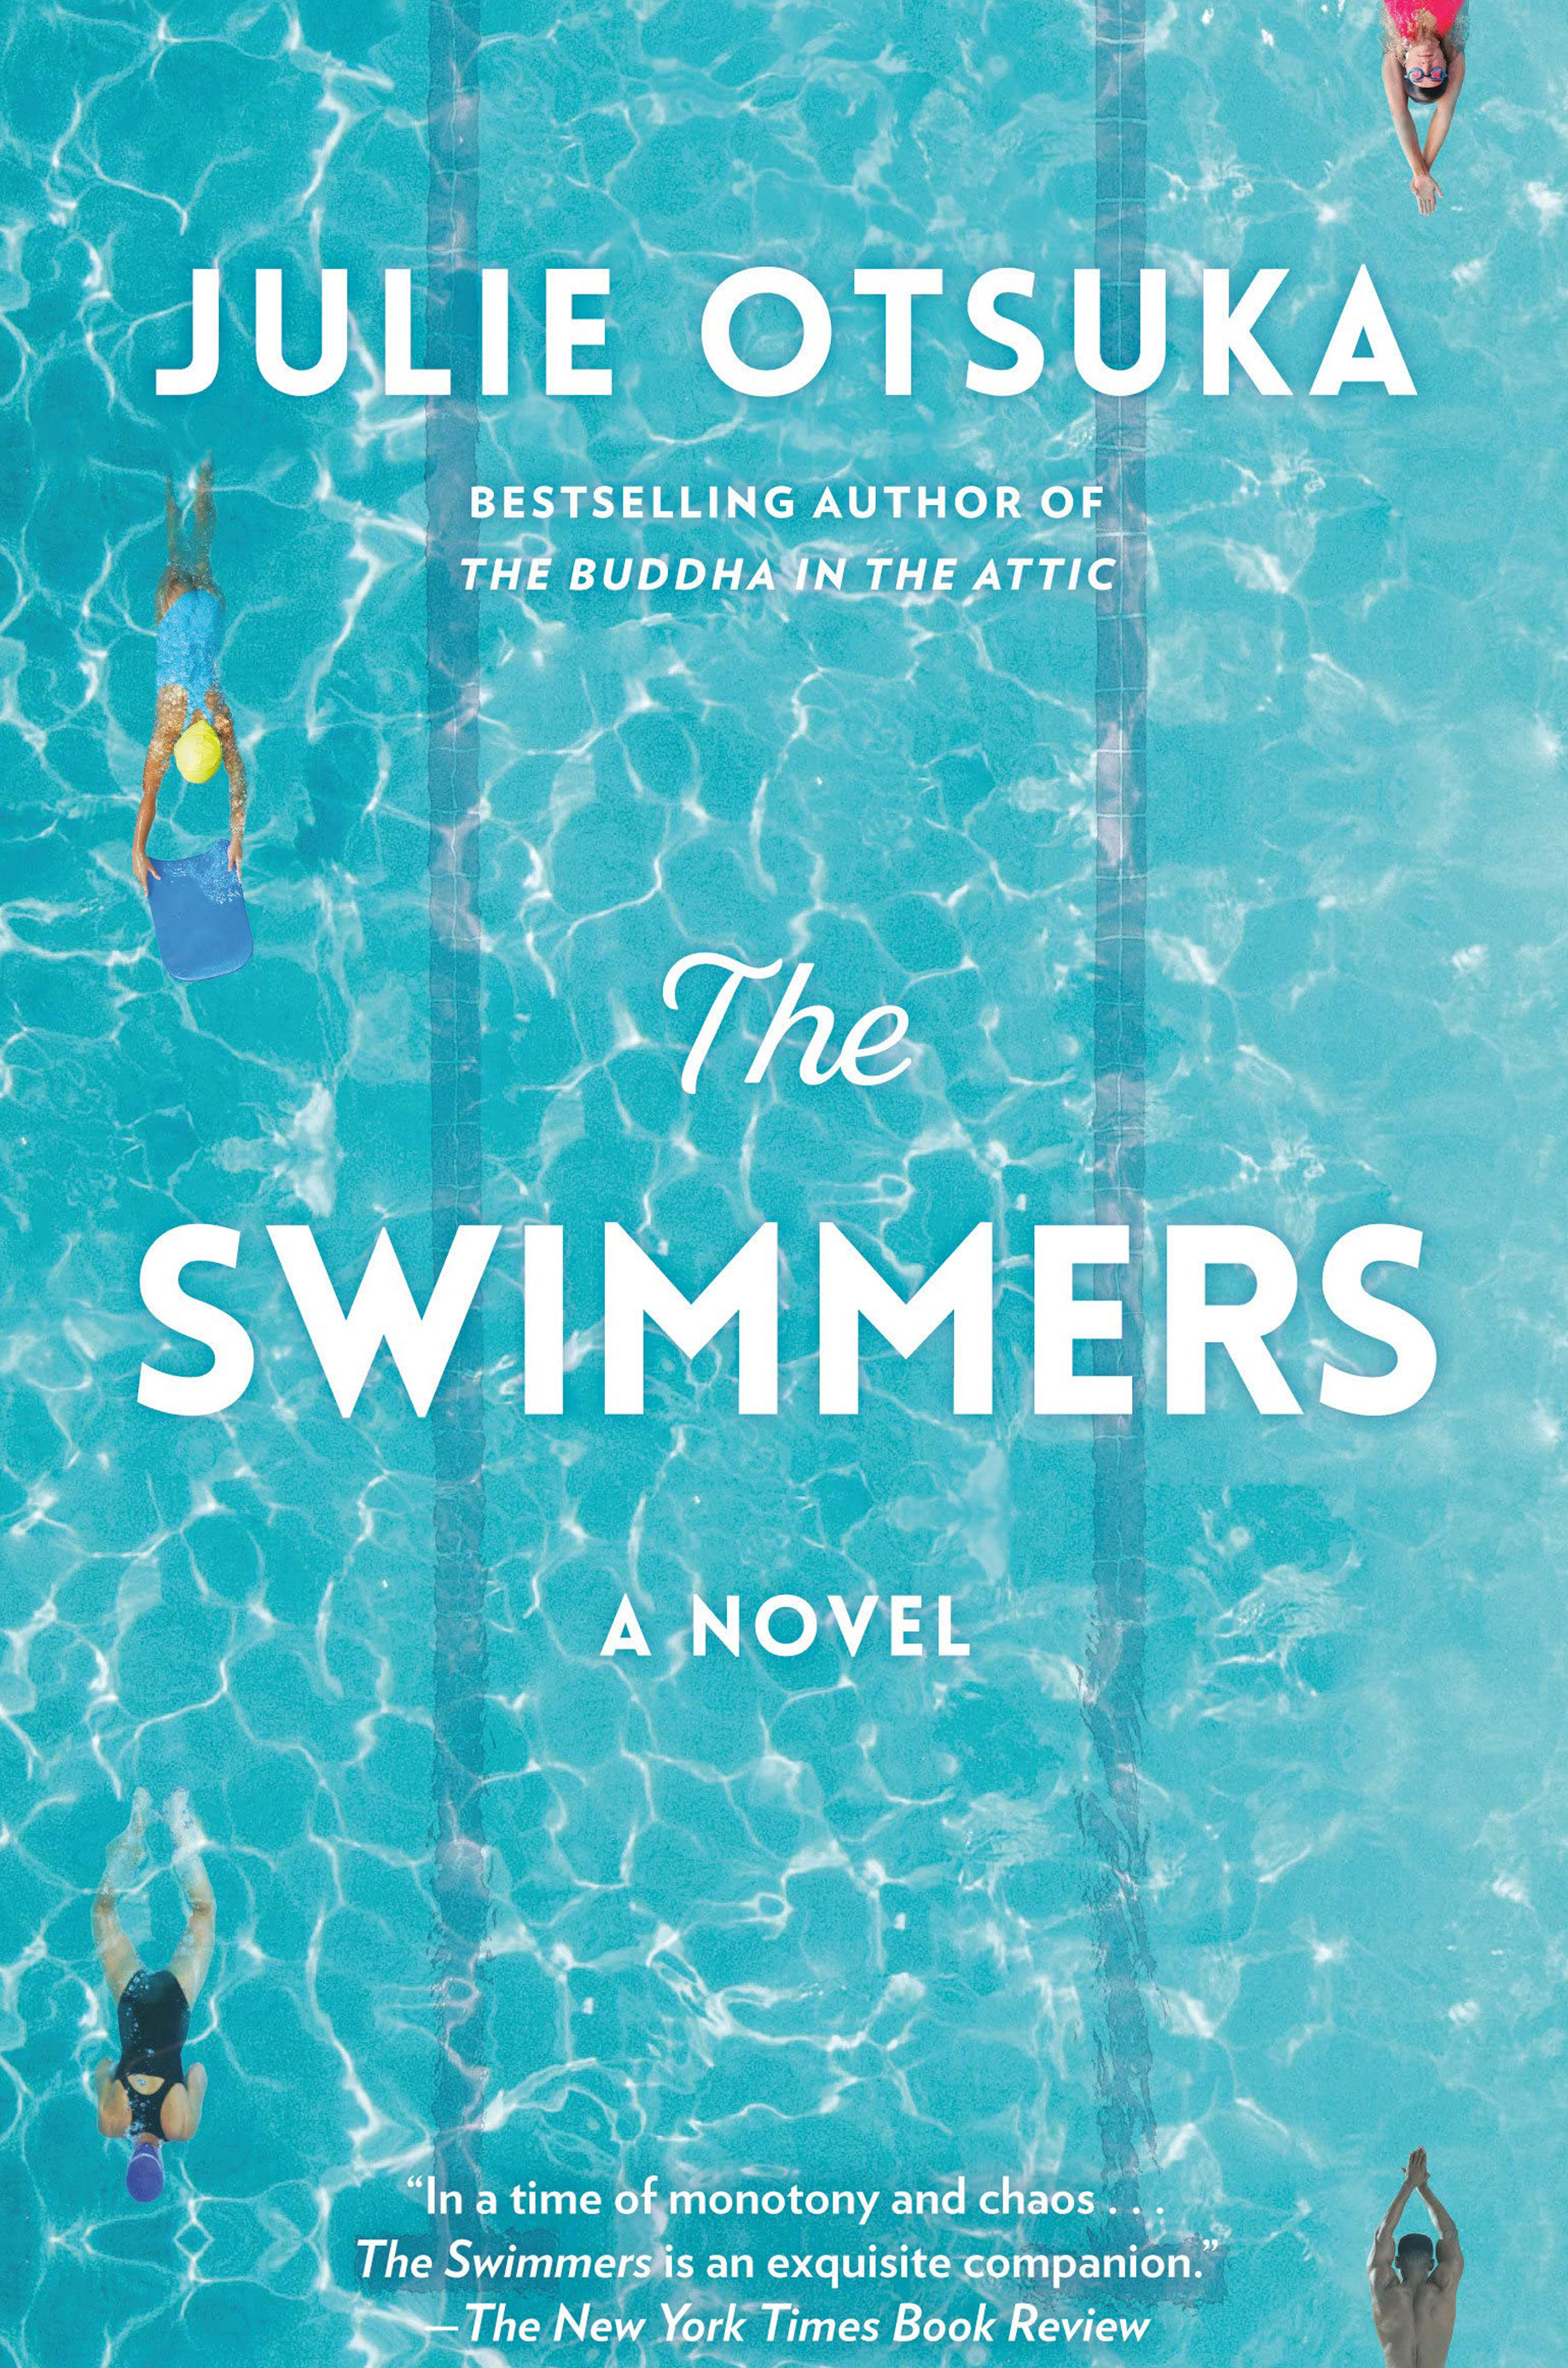 The Swimmers by Julie Ostuka (Alfred A. Knopf)